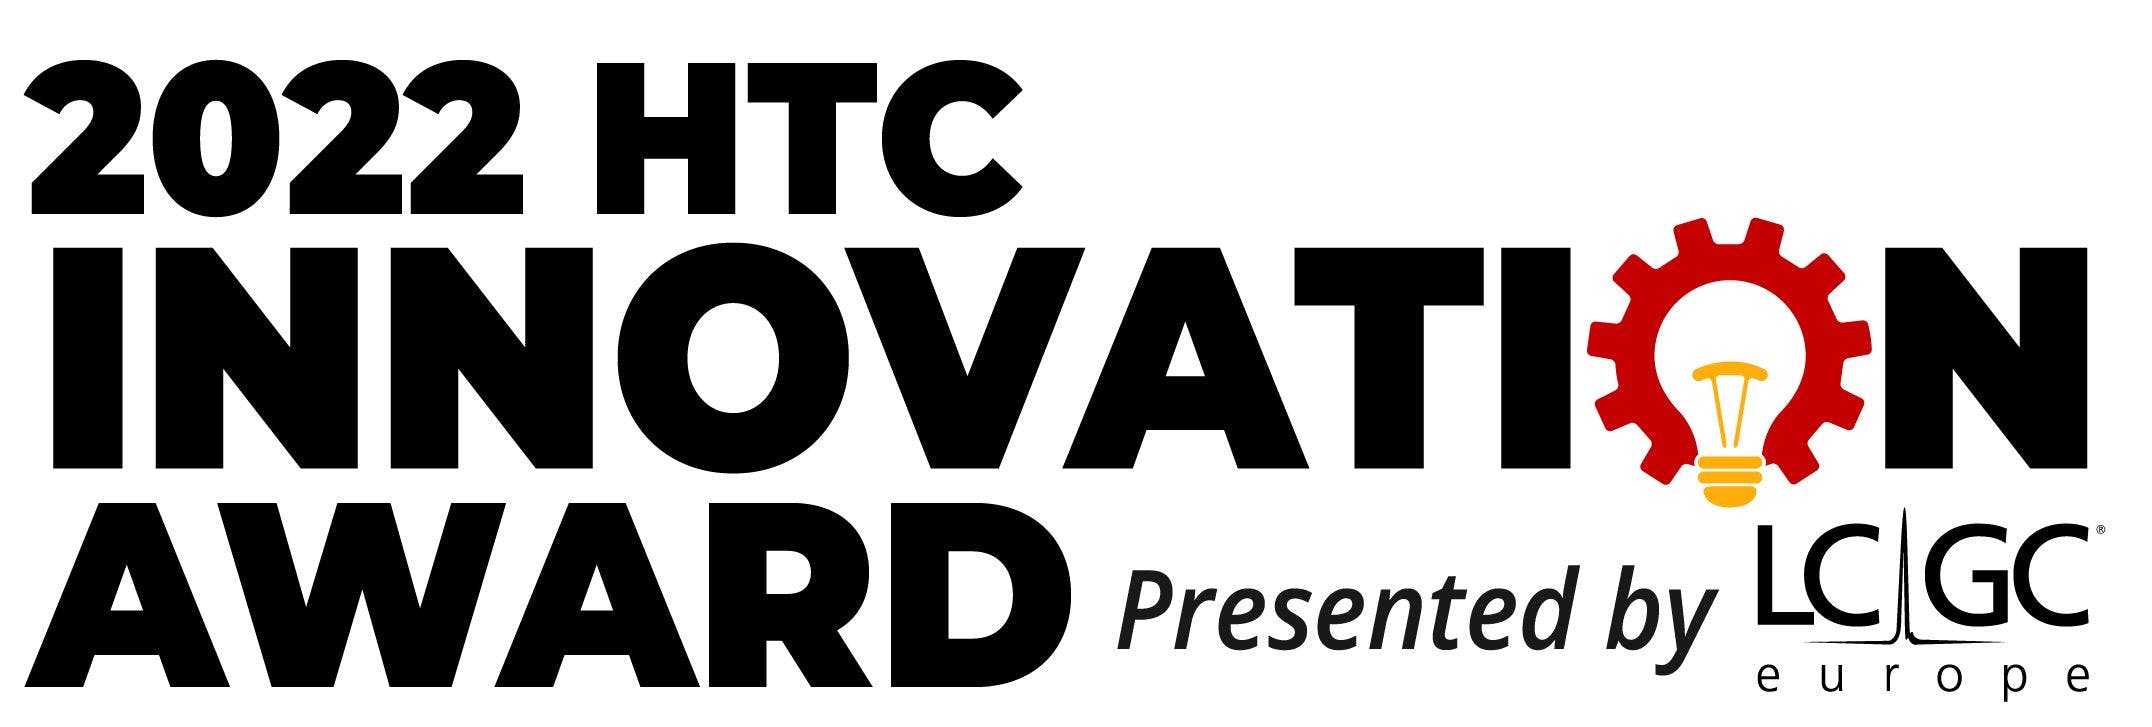 LCGC Europe and HTC-17 Launch HTC Innovation Award for 2022 